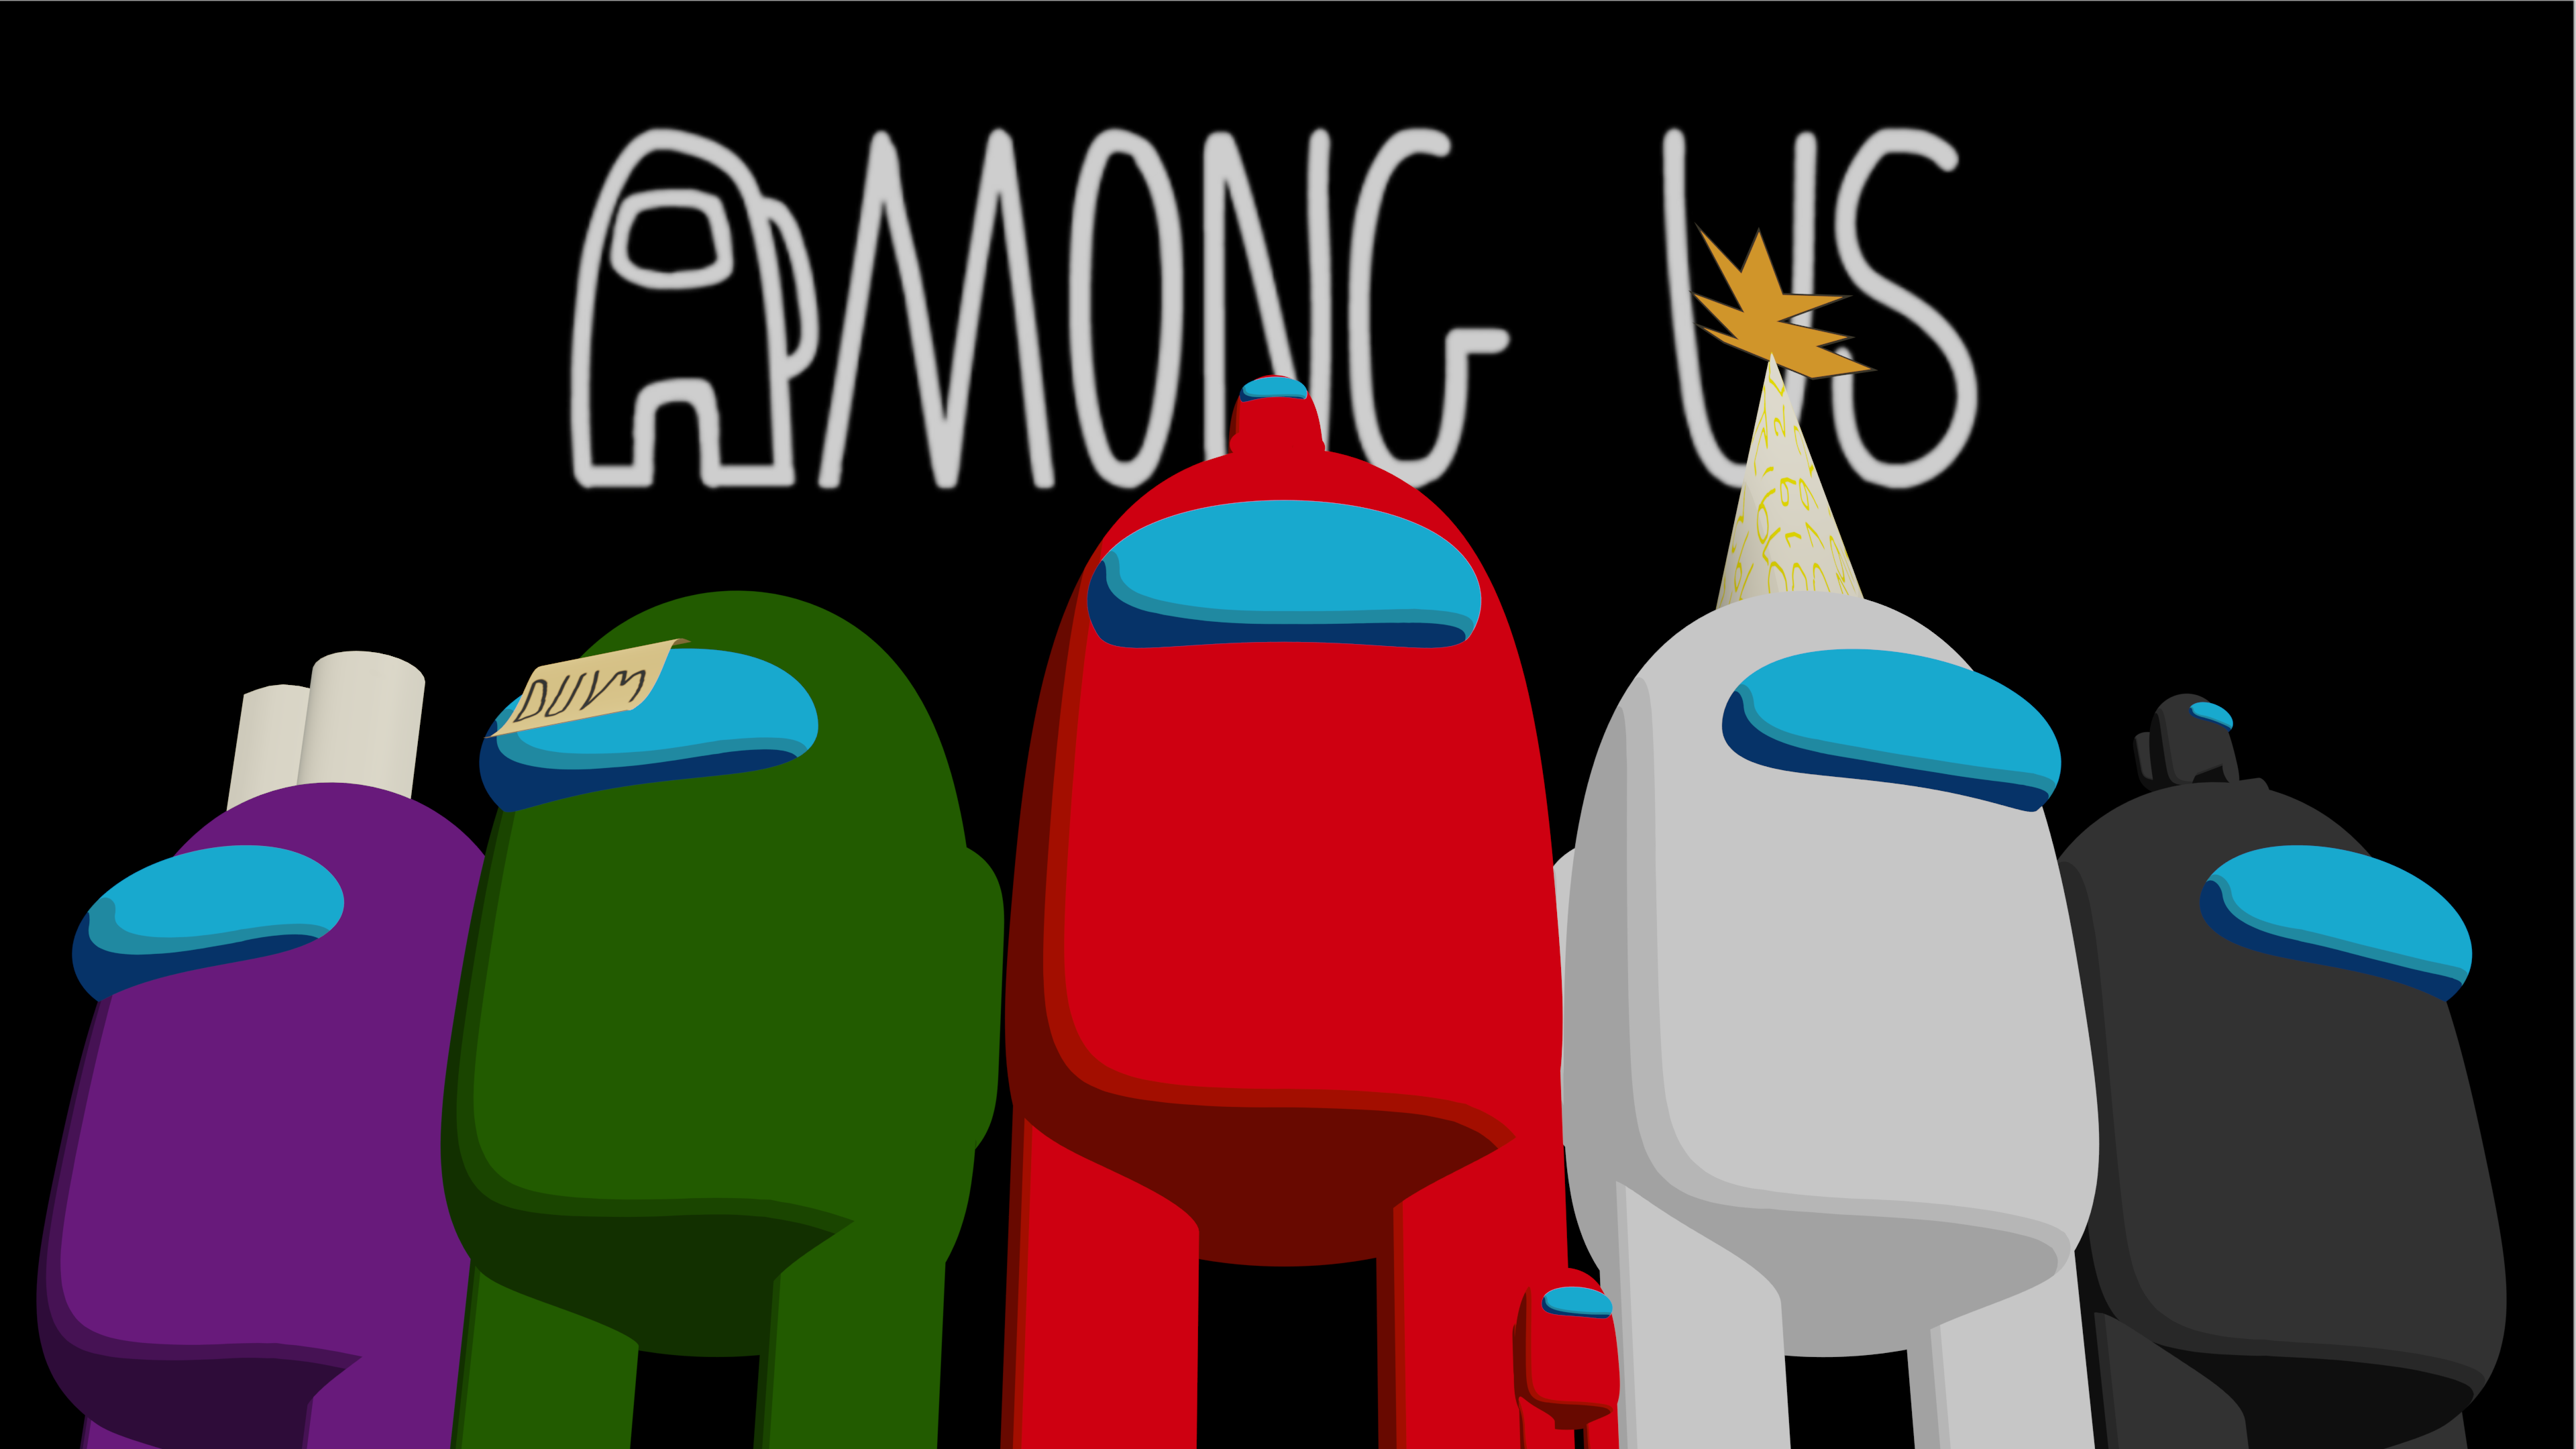 Among Us Background Red, 2932x2932 Red Vs Blue Crewmate Among Us iPad Pro Retina Display Wallpaper HD Games 4k Wallpaper Image Photo And Background